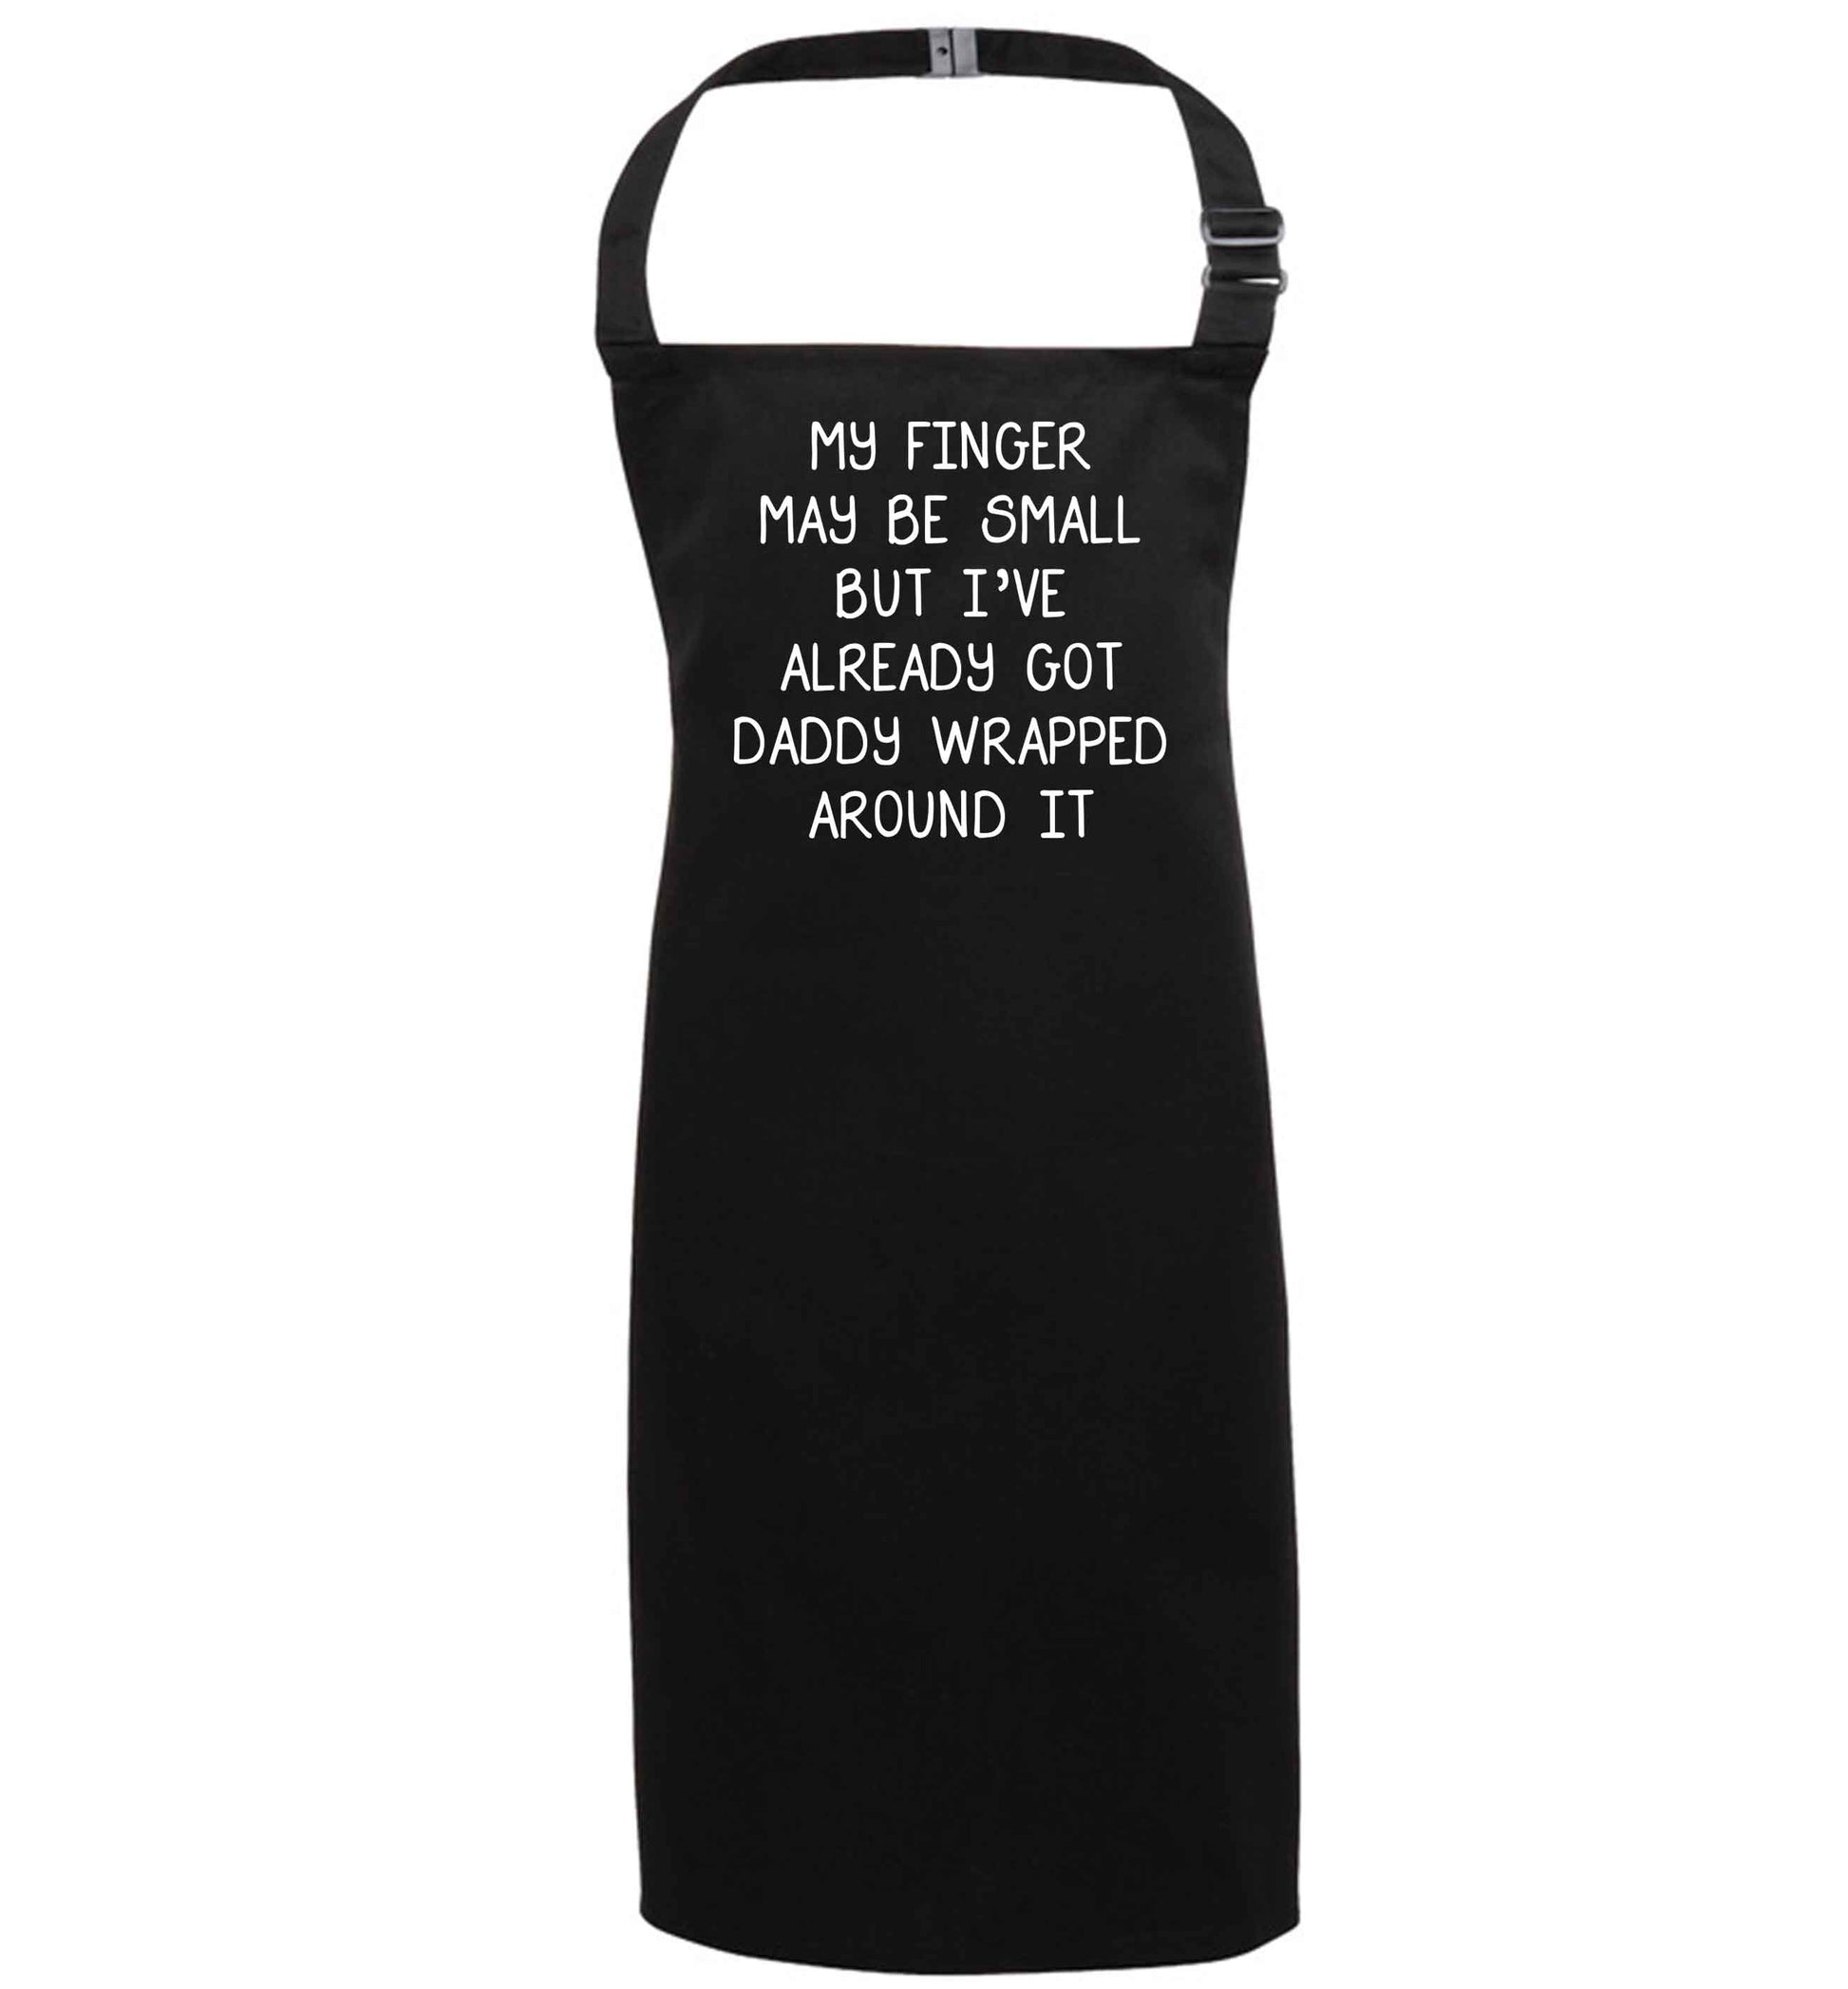 My finger may be small but I've already got daddy wrapped around it black apron 7-10 years